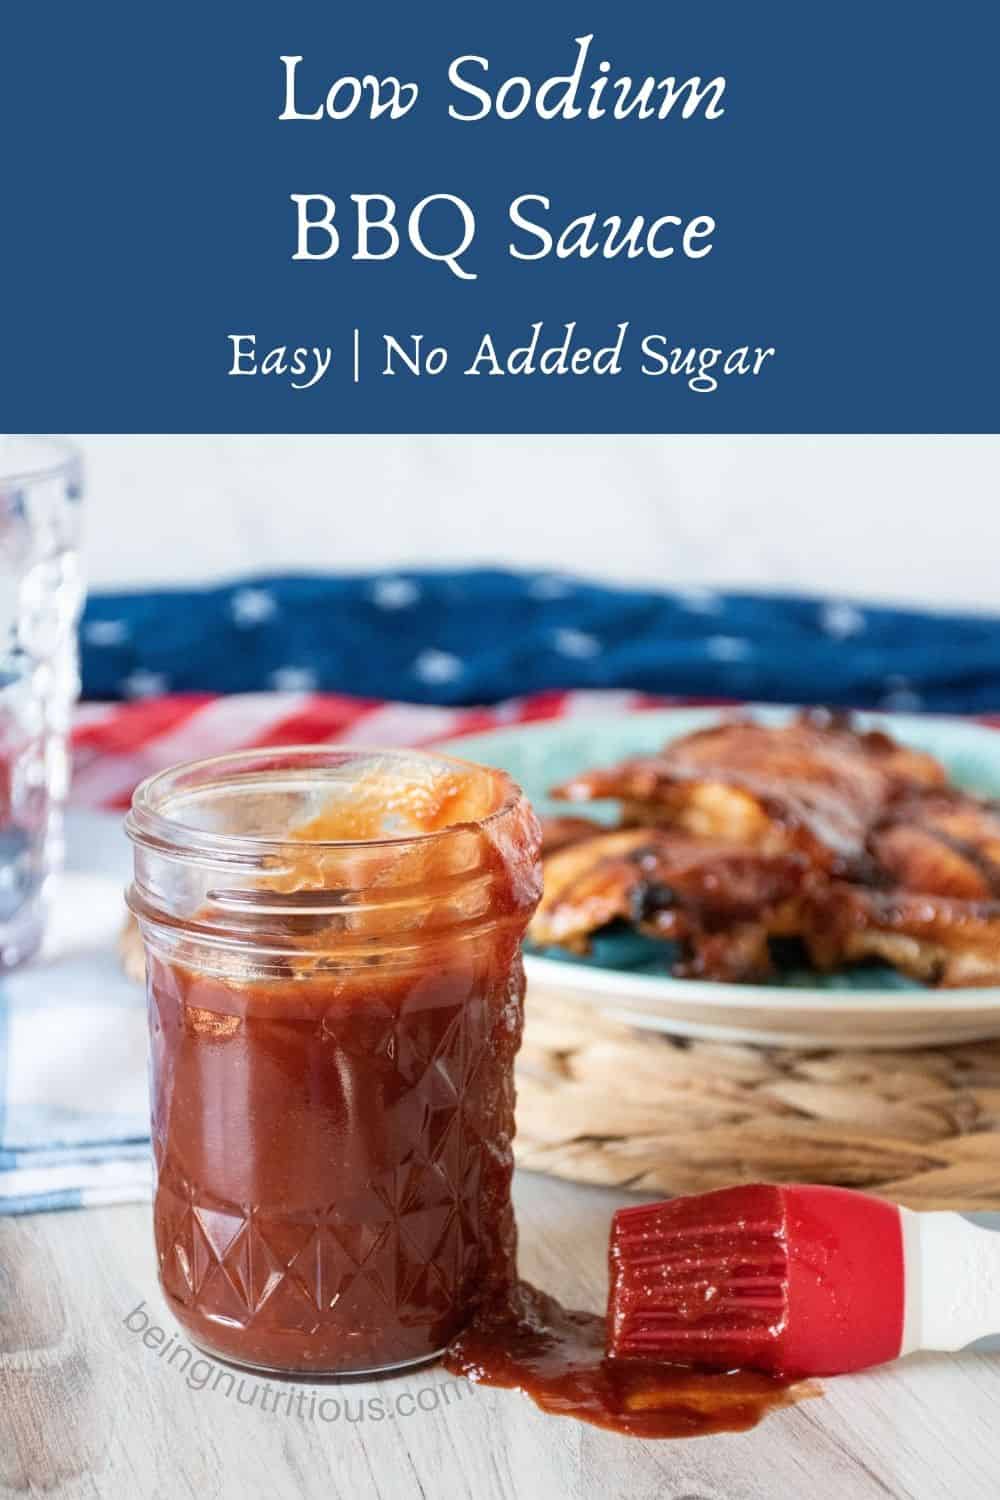 BBQ sauce in a mason jar with grilled chicken on a plate in the background. Text overlay: Low Sodium BBQ Sauce; easy, no added sugar.